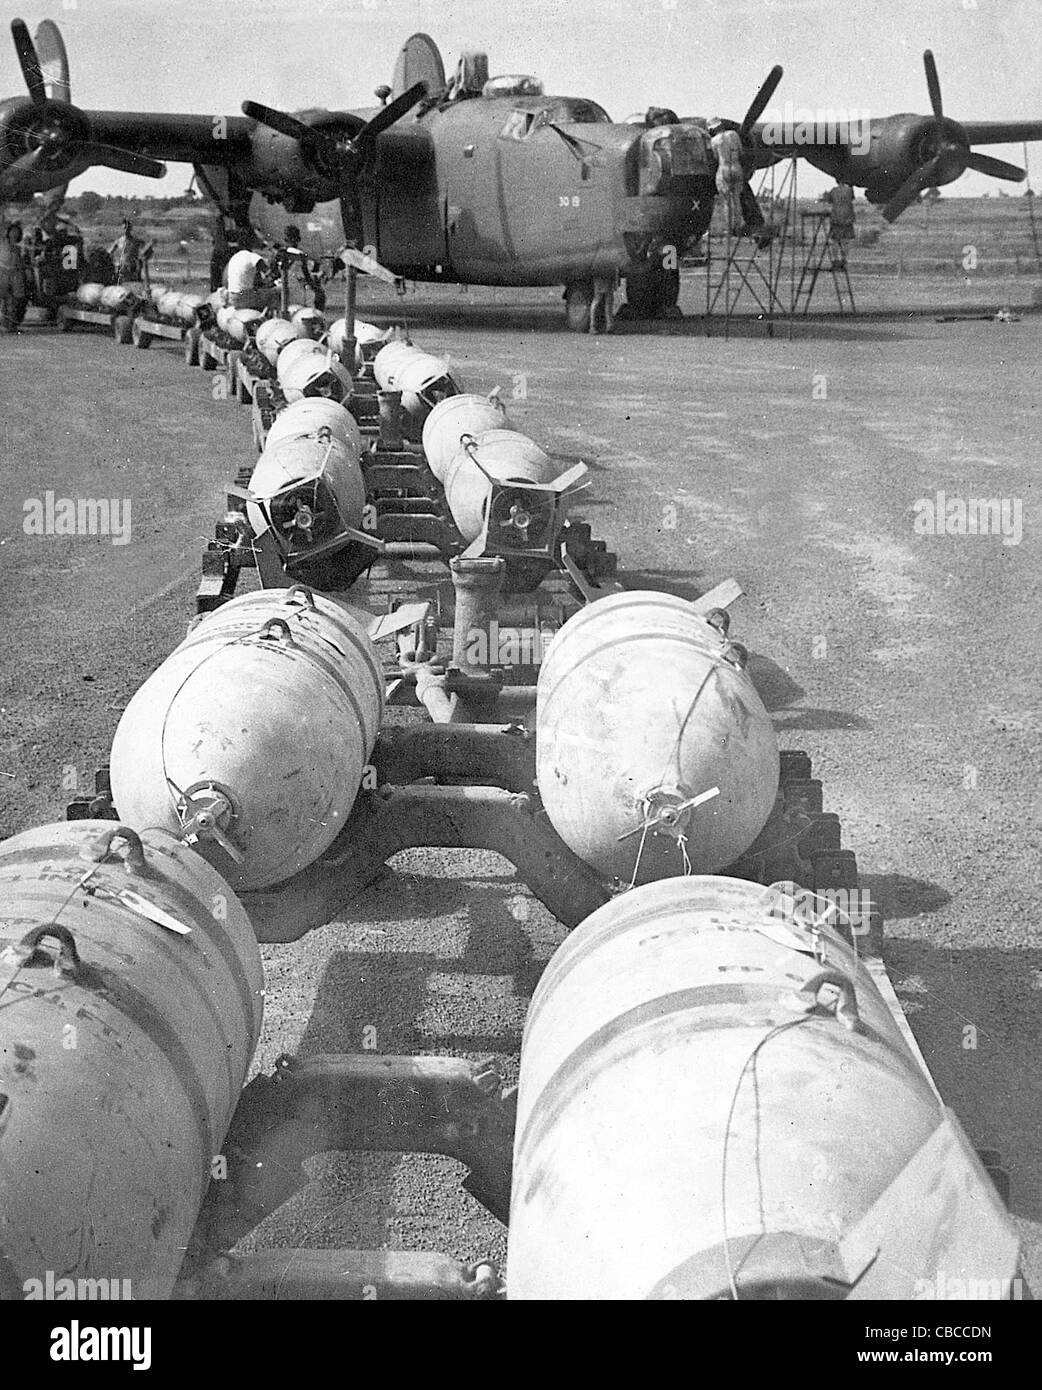 A B24 Liberator bomber is loaded up prior to a mission Stock Photo